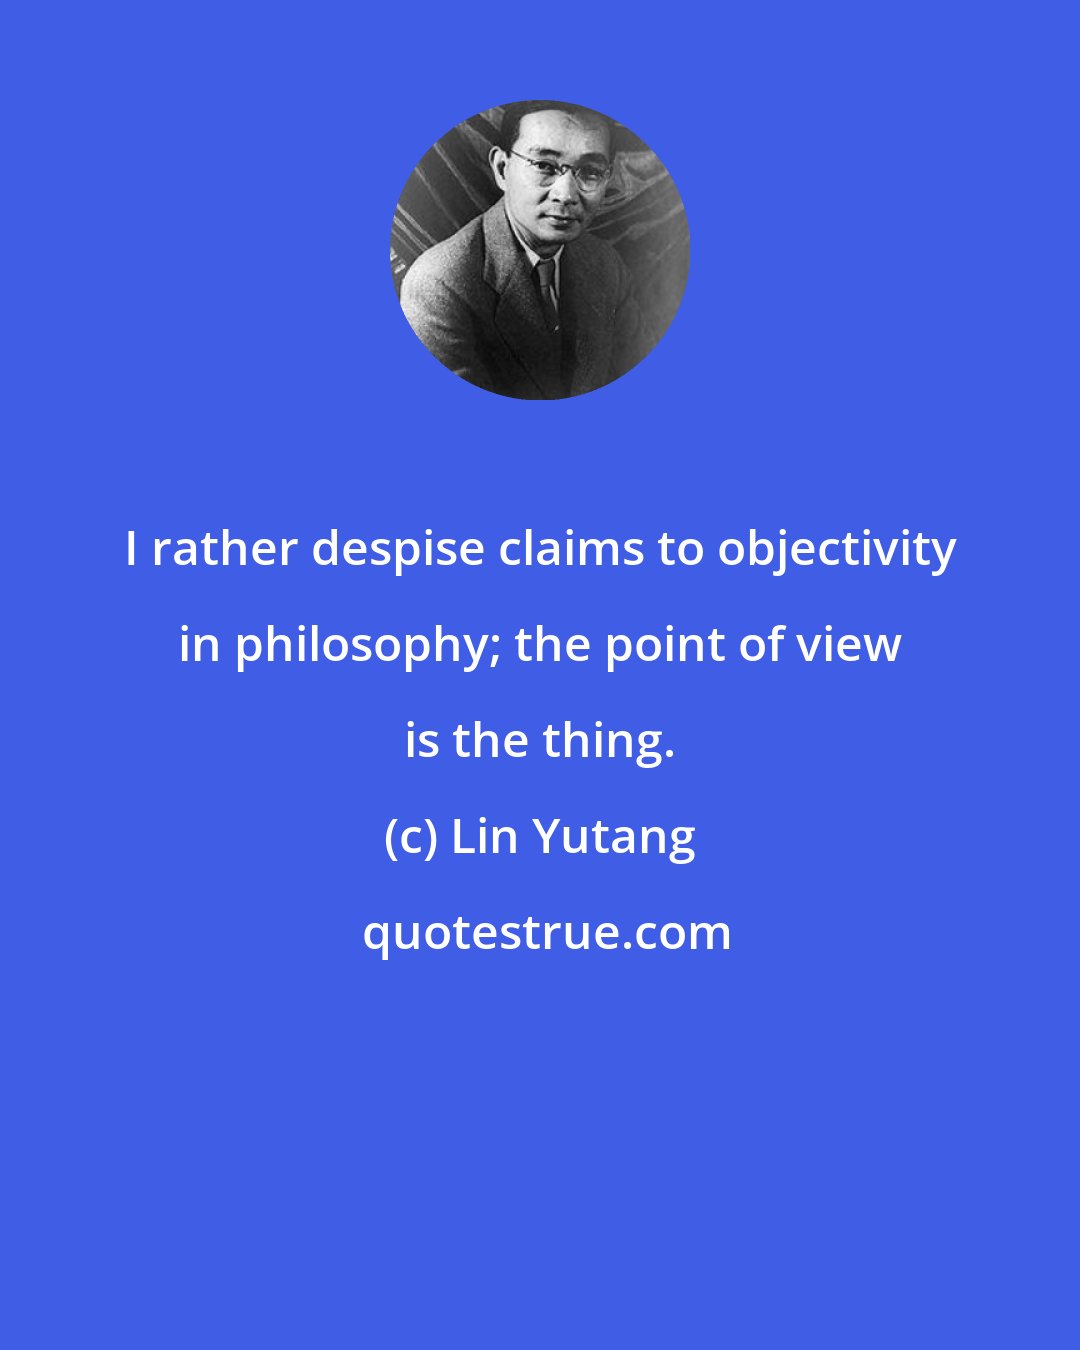 Lin Yutang: I rather despise claims to objectivity in philosophy; the point of view is the thing.